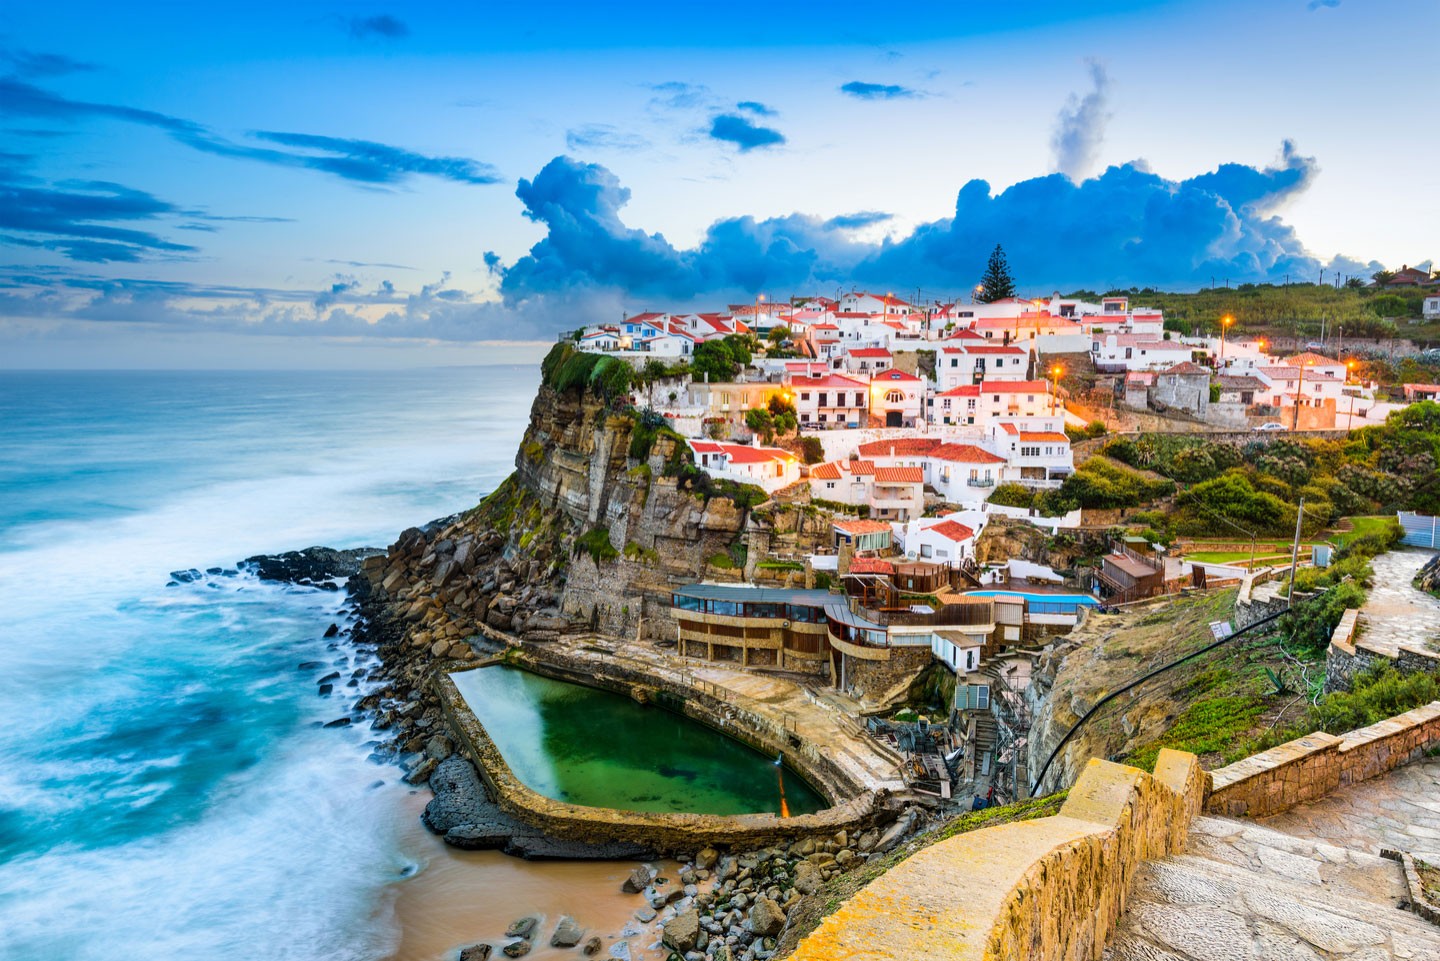 🗽 What Famous Landmark Should You Visit Next Based on Your A-Z Travel Bucket List? Portugal Iberian Peninsula